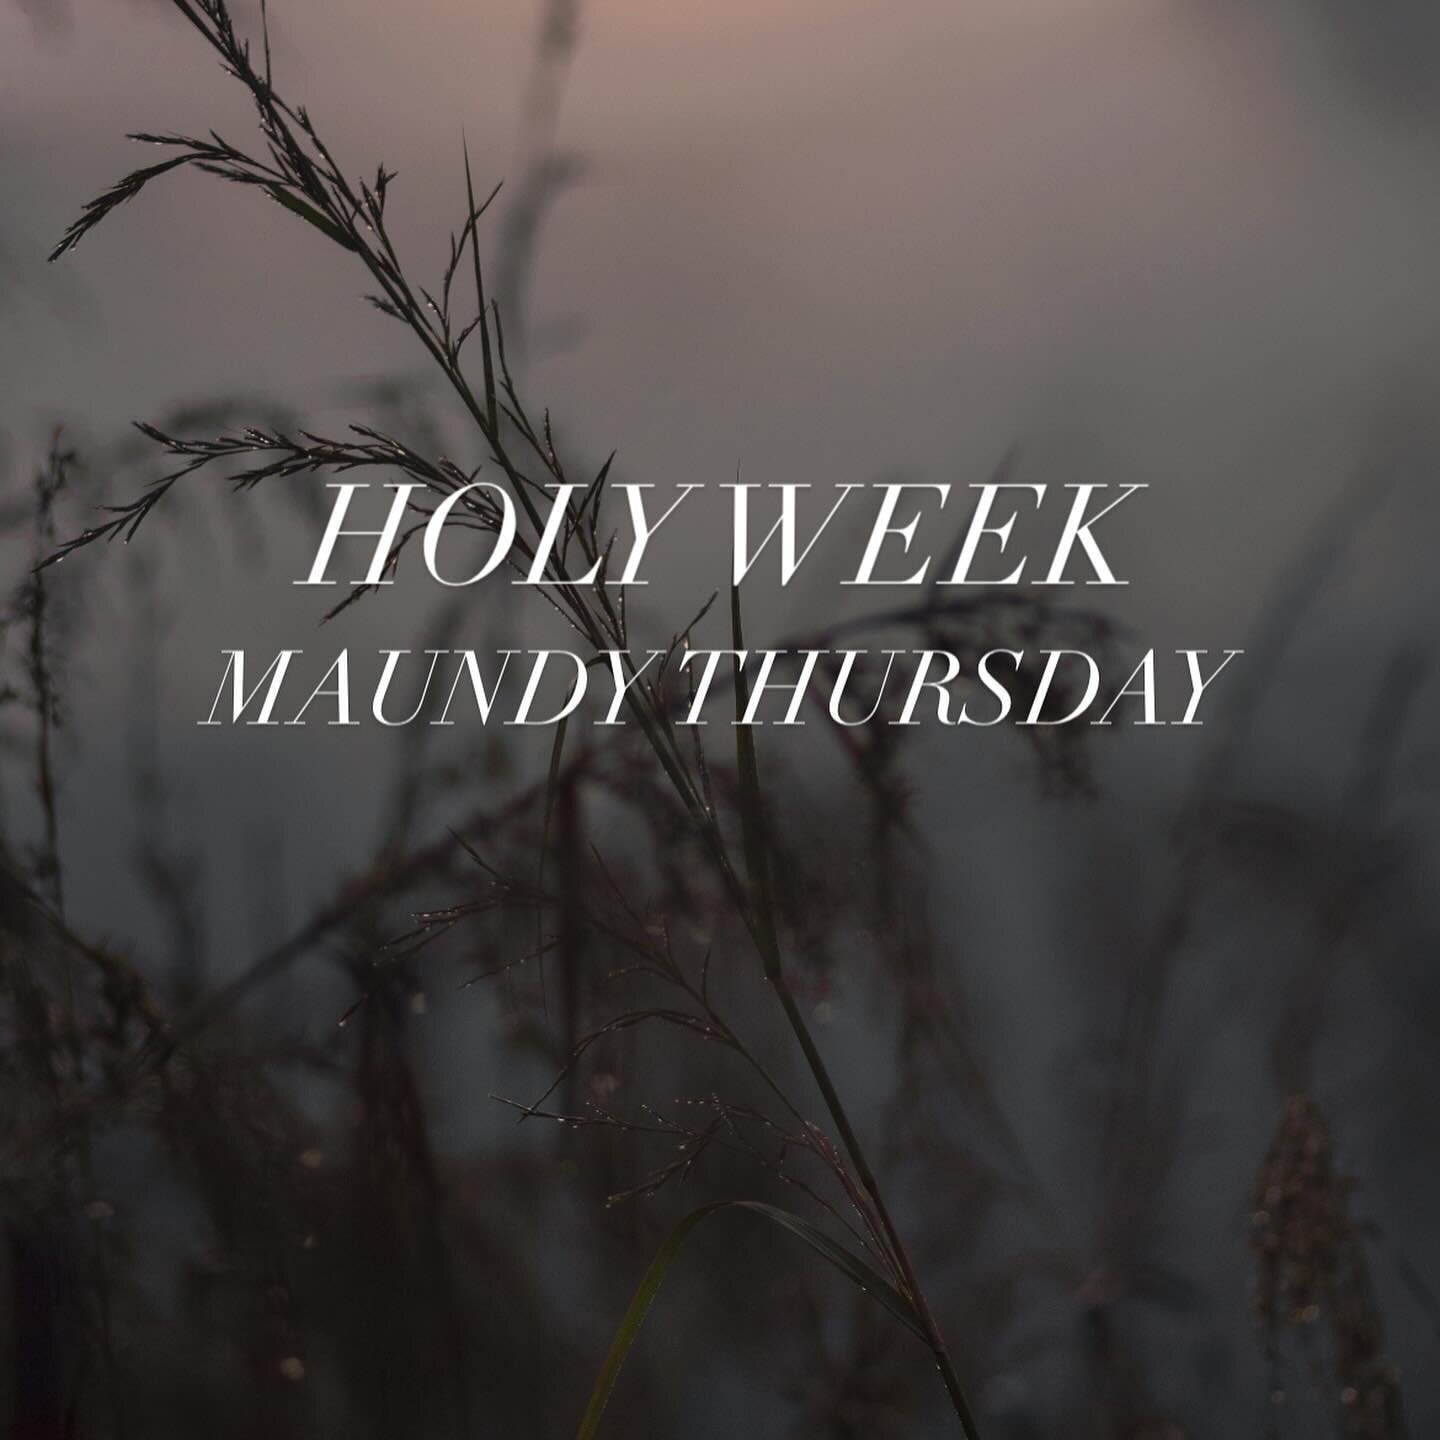 MAUNDY THURSDAY
__
What even is Maundy??
It comes from a Latin word related to &lsquo;command&rsquo;. John&rsquo;s account of the Gospel records Jesus saying, &ldquo;A new command I give you&hellip;&rdquo;
This was after he loved, taught, and served 